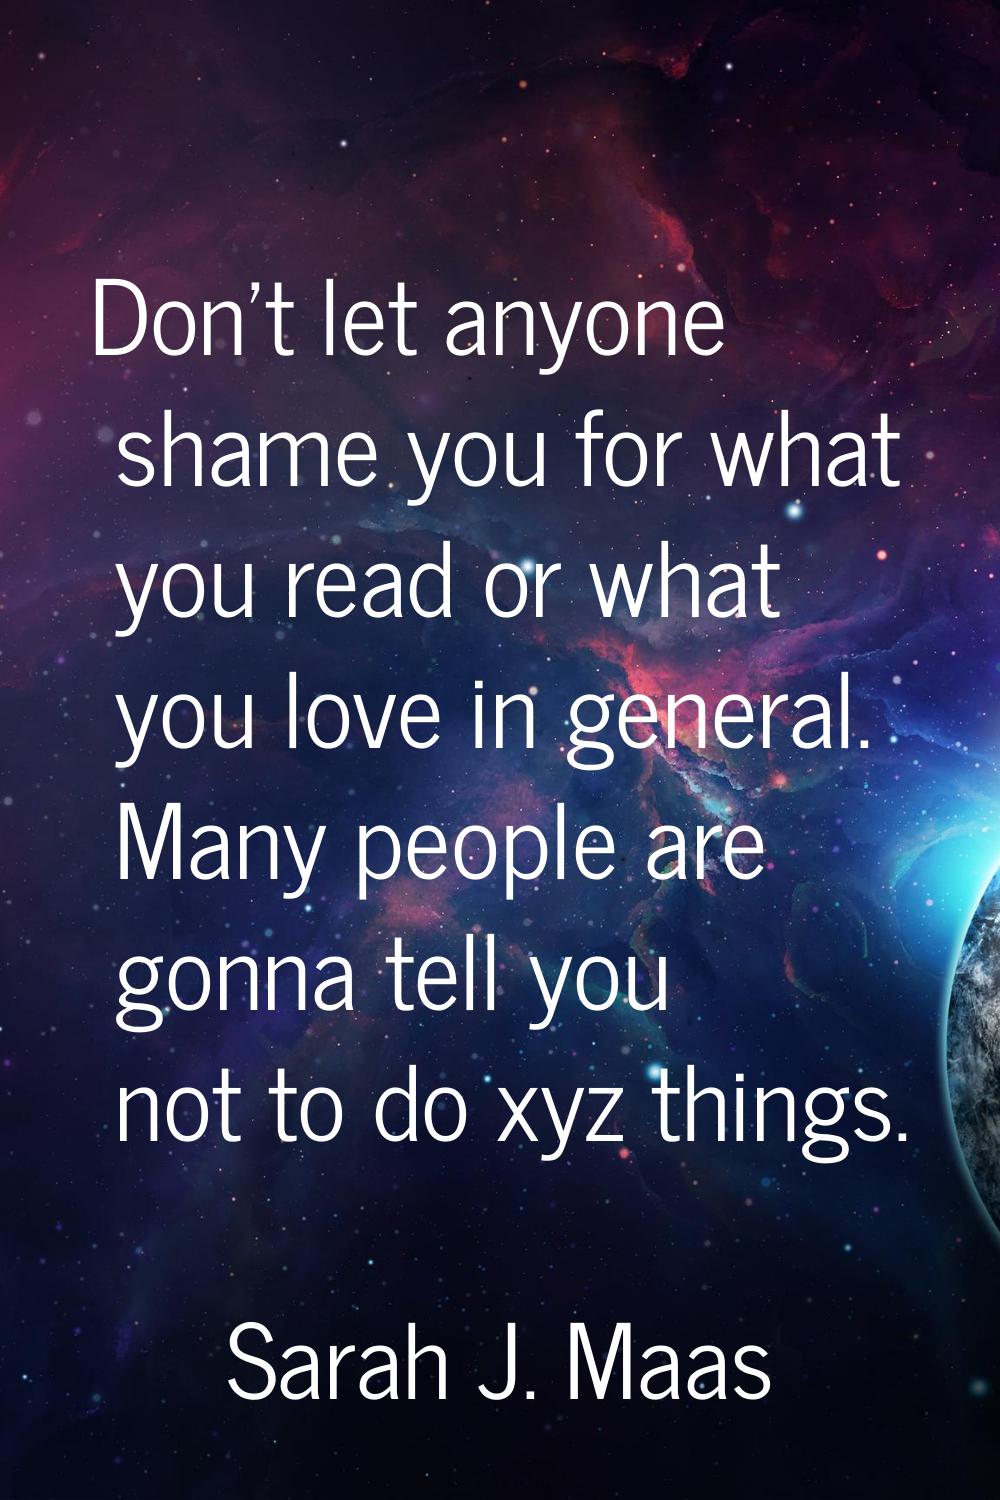 Don't let anyone shame you for what you read or what you love in general. Many people are gonna tel